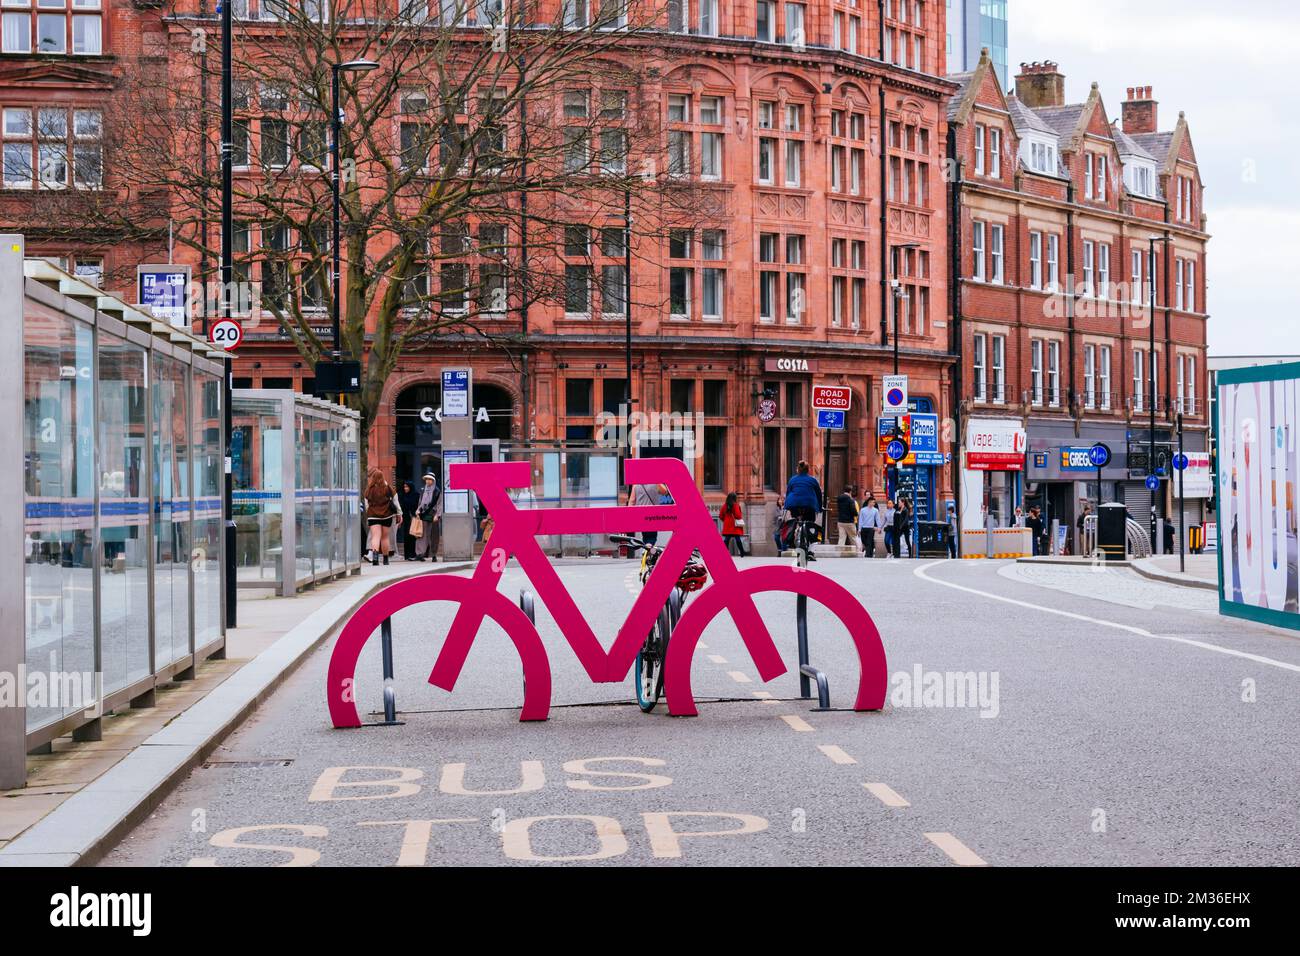 Bicycle parking station. Sheffield, South Yorkshire, Yorkshire and the Humber, England, United Kingdom, Europe Stock Photo